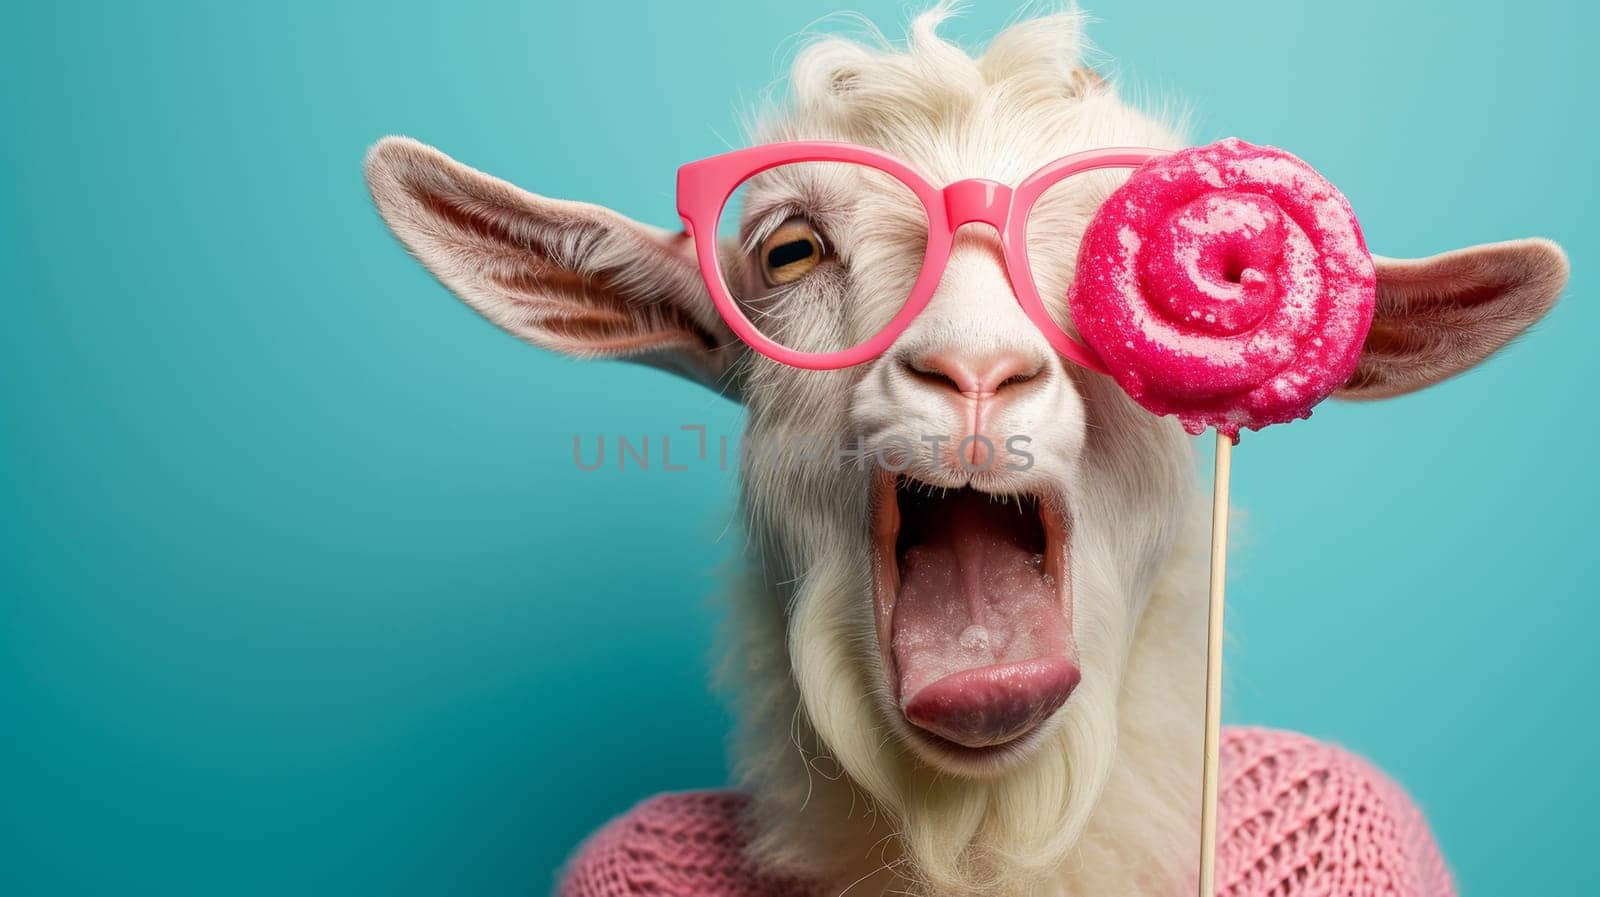 A goat with glasses and pink sweater holding a lollipop, AI by starush